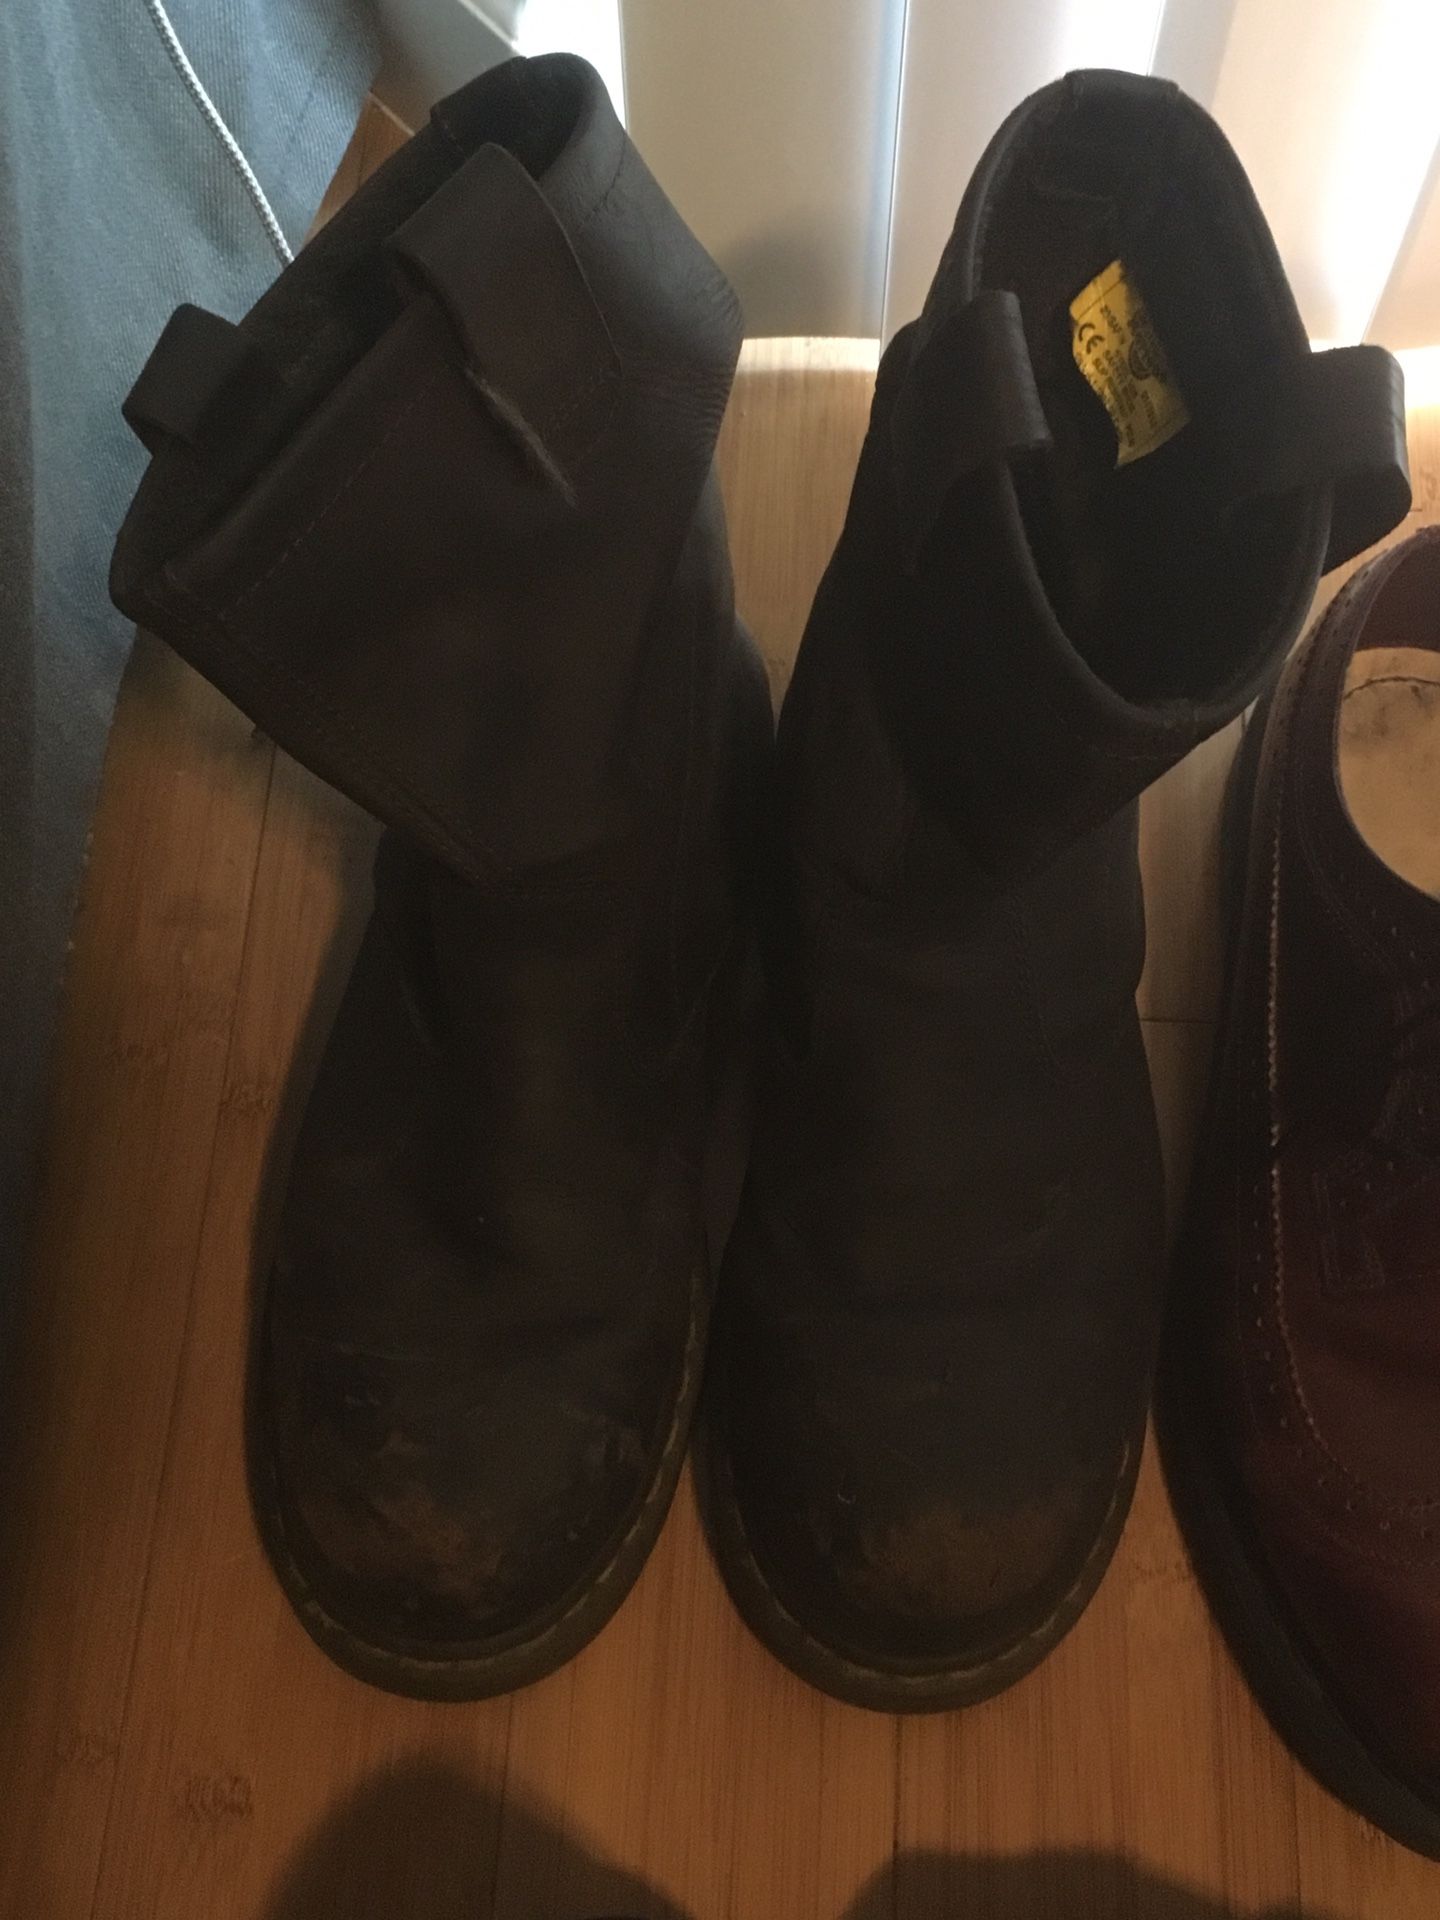 Dr. Marten’s steel toed slip on work boots size 11 (scuff marks on toes , reduced price)